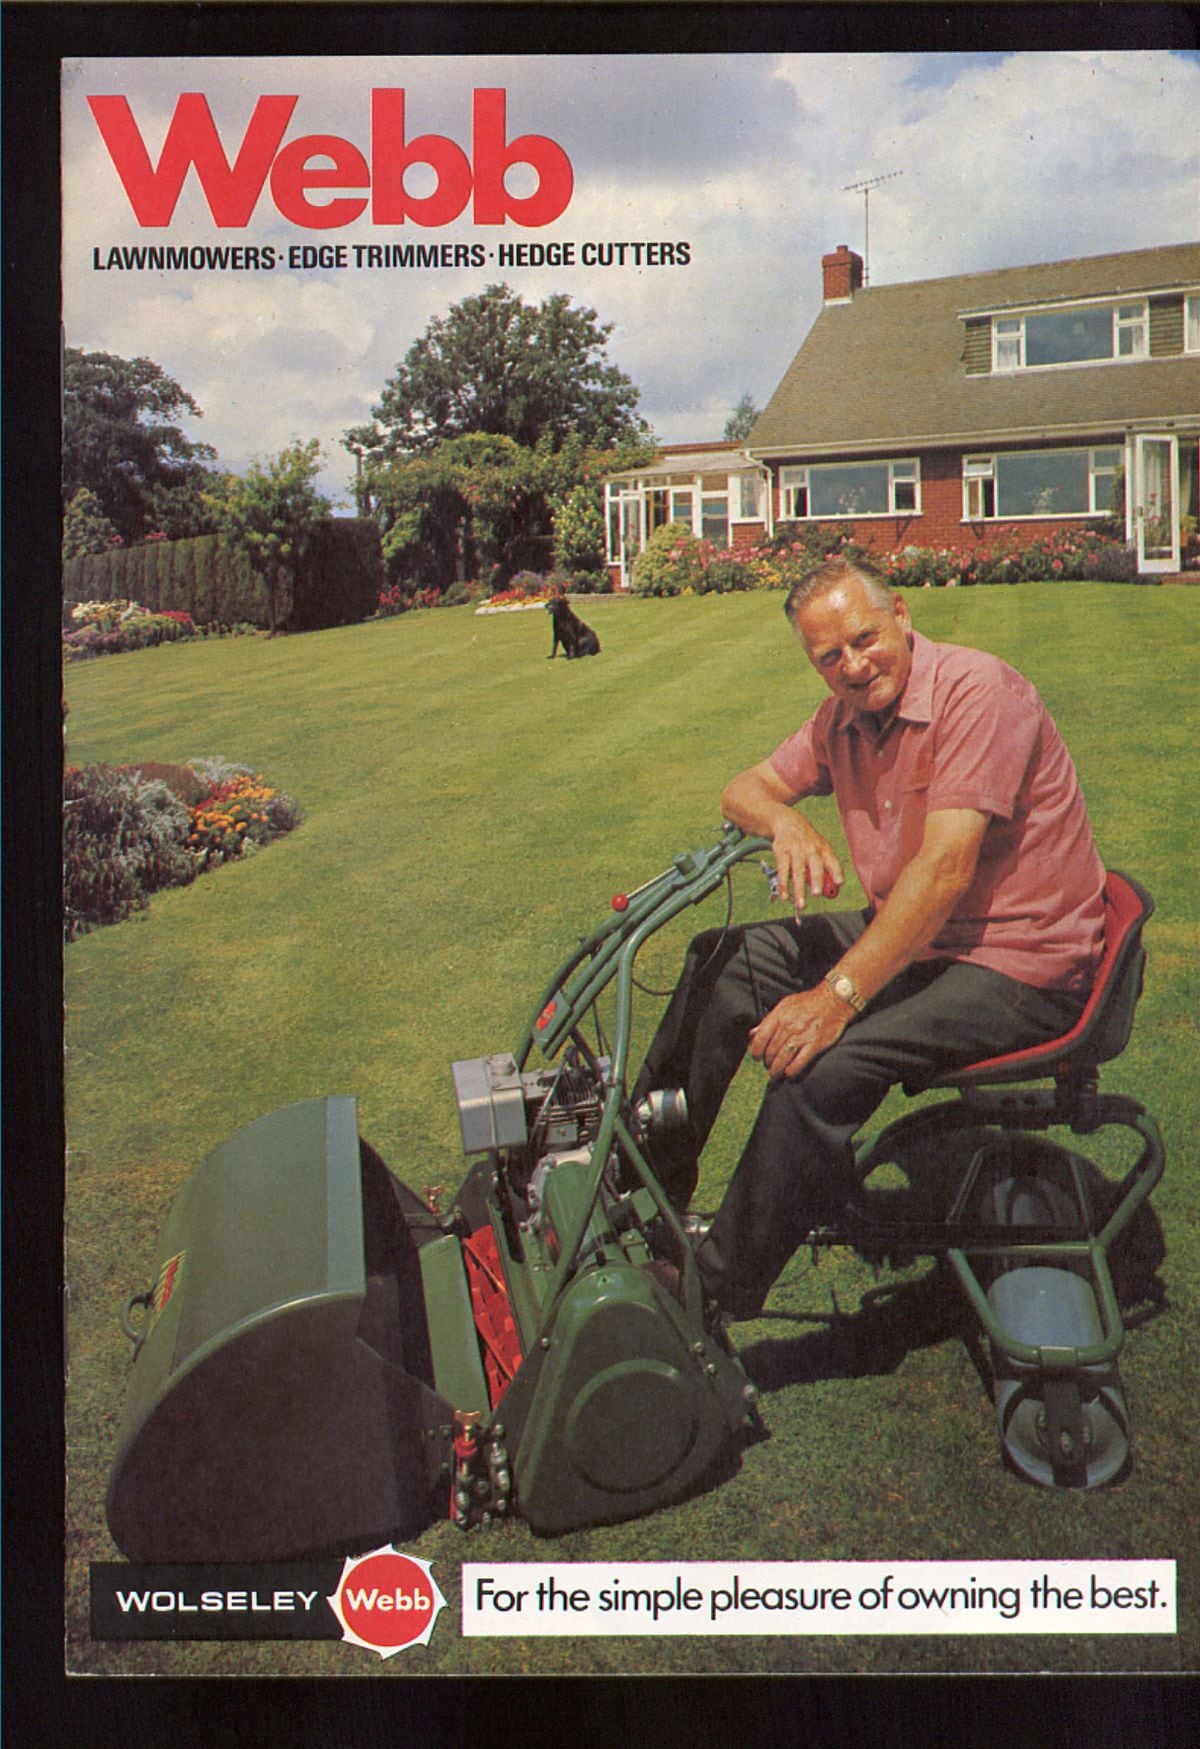 Riding high on the cover of a lawnmower catalogue.